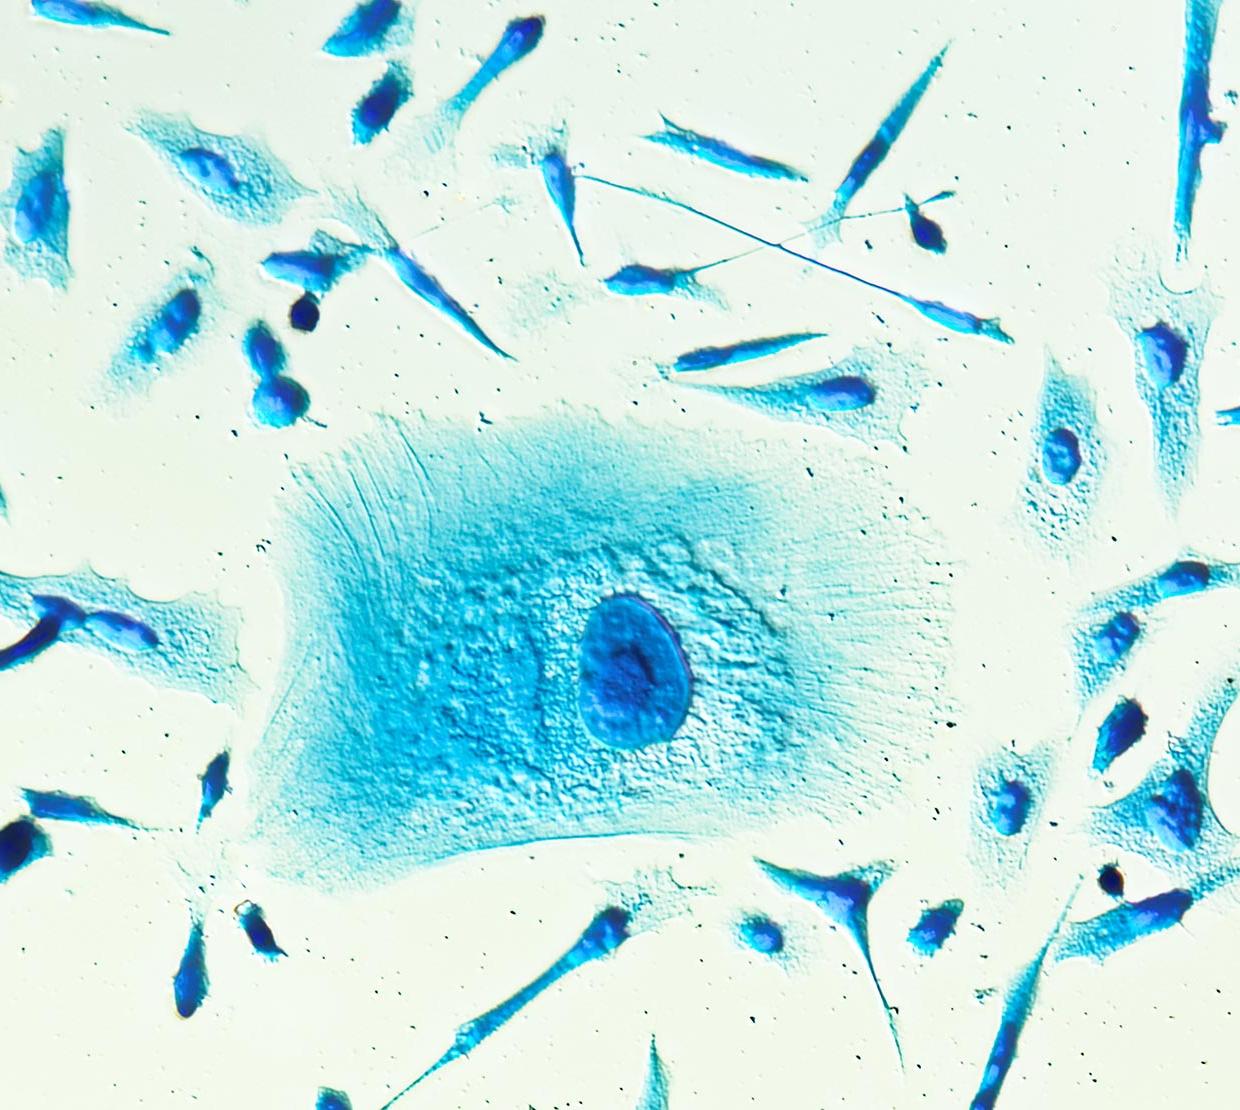 microscopic image of blue PC-3 cancer cells 